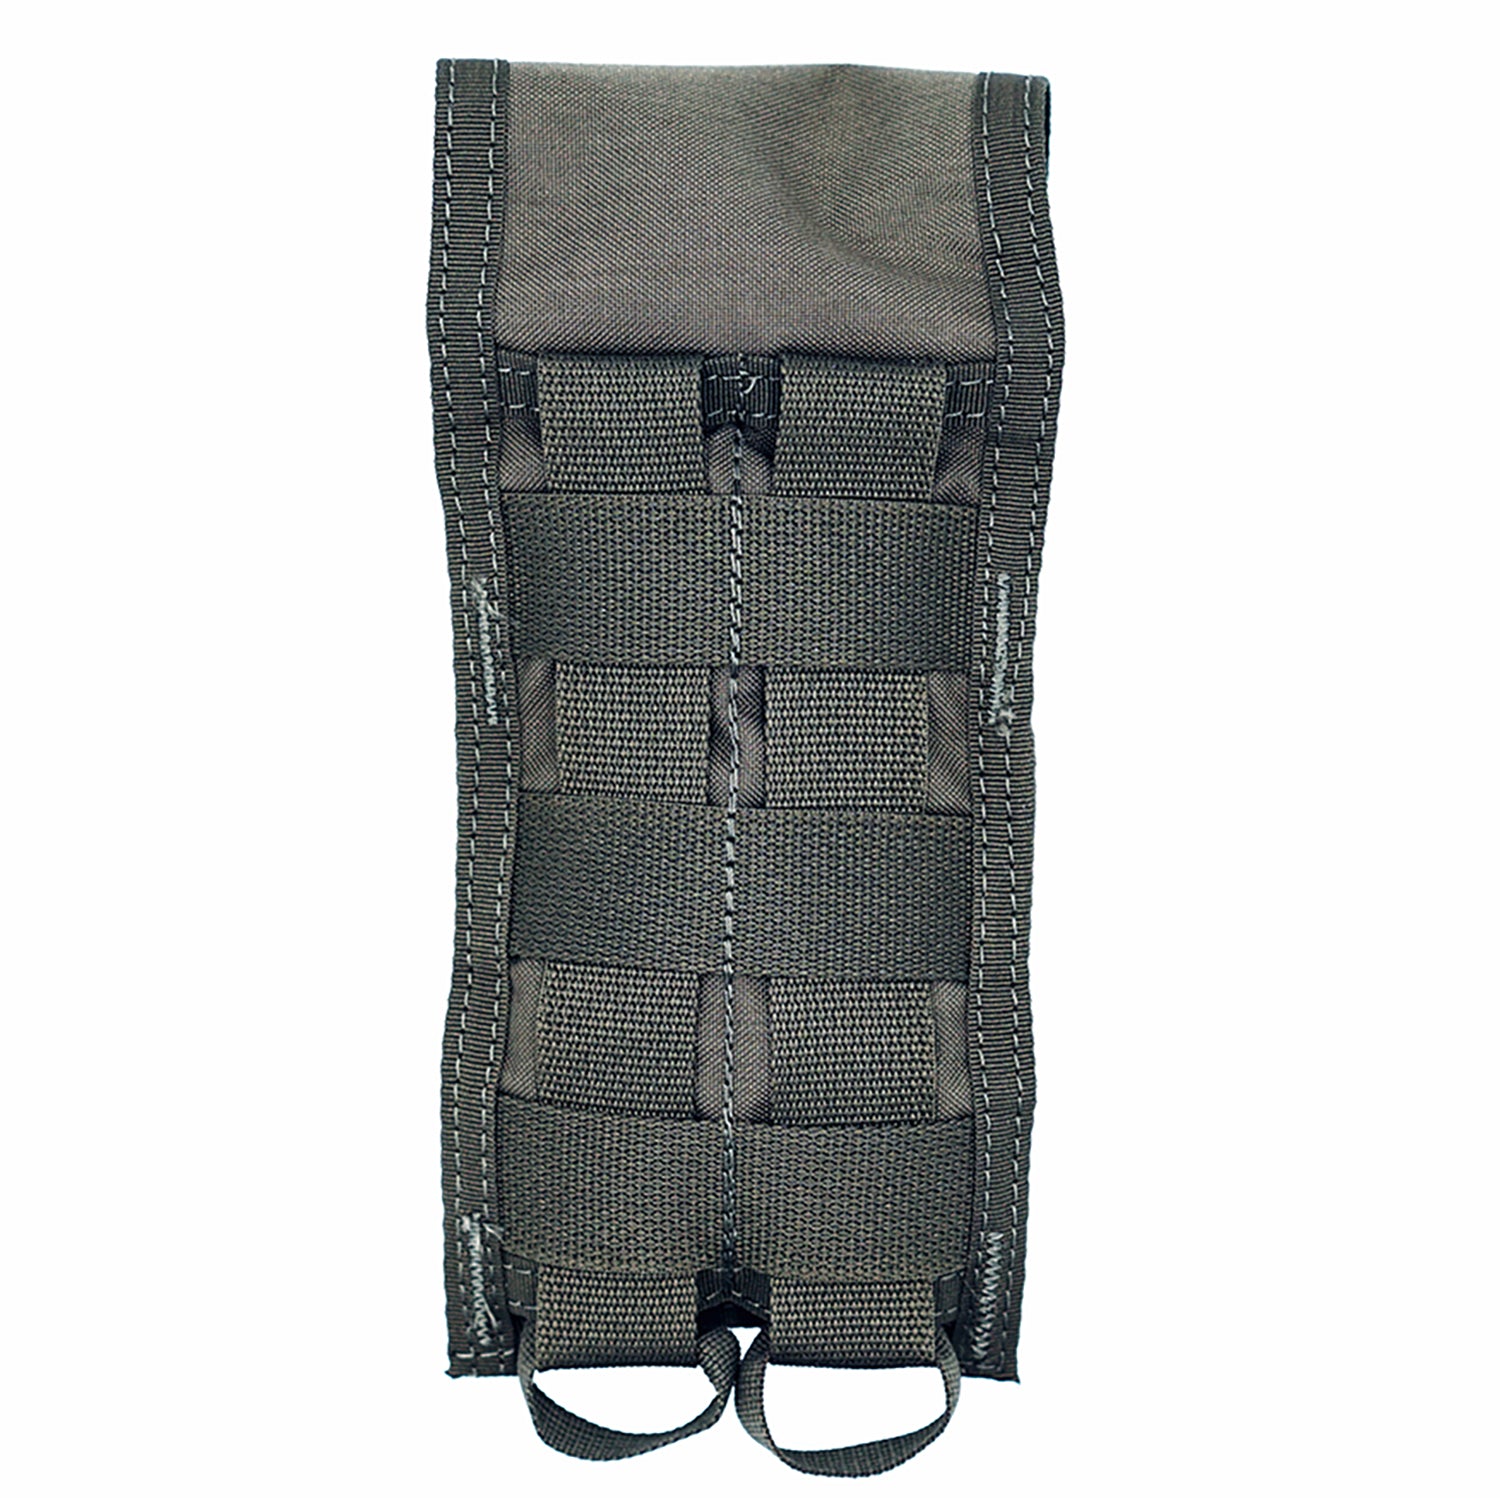 Pre MSA Paraclete Style Tiered M4 Mag Pouch